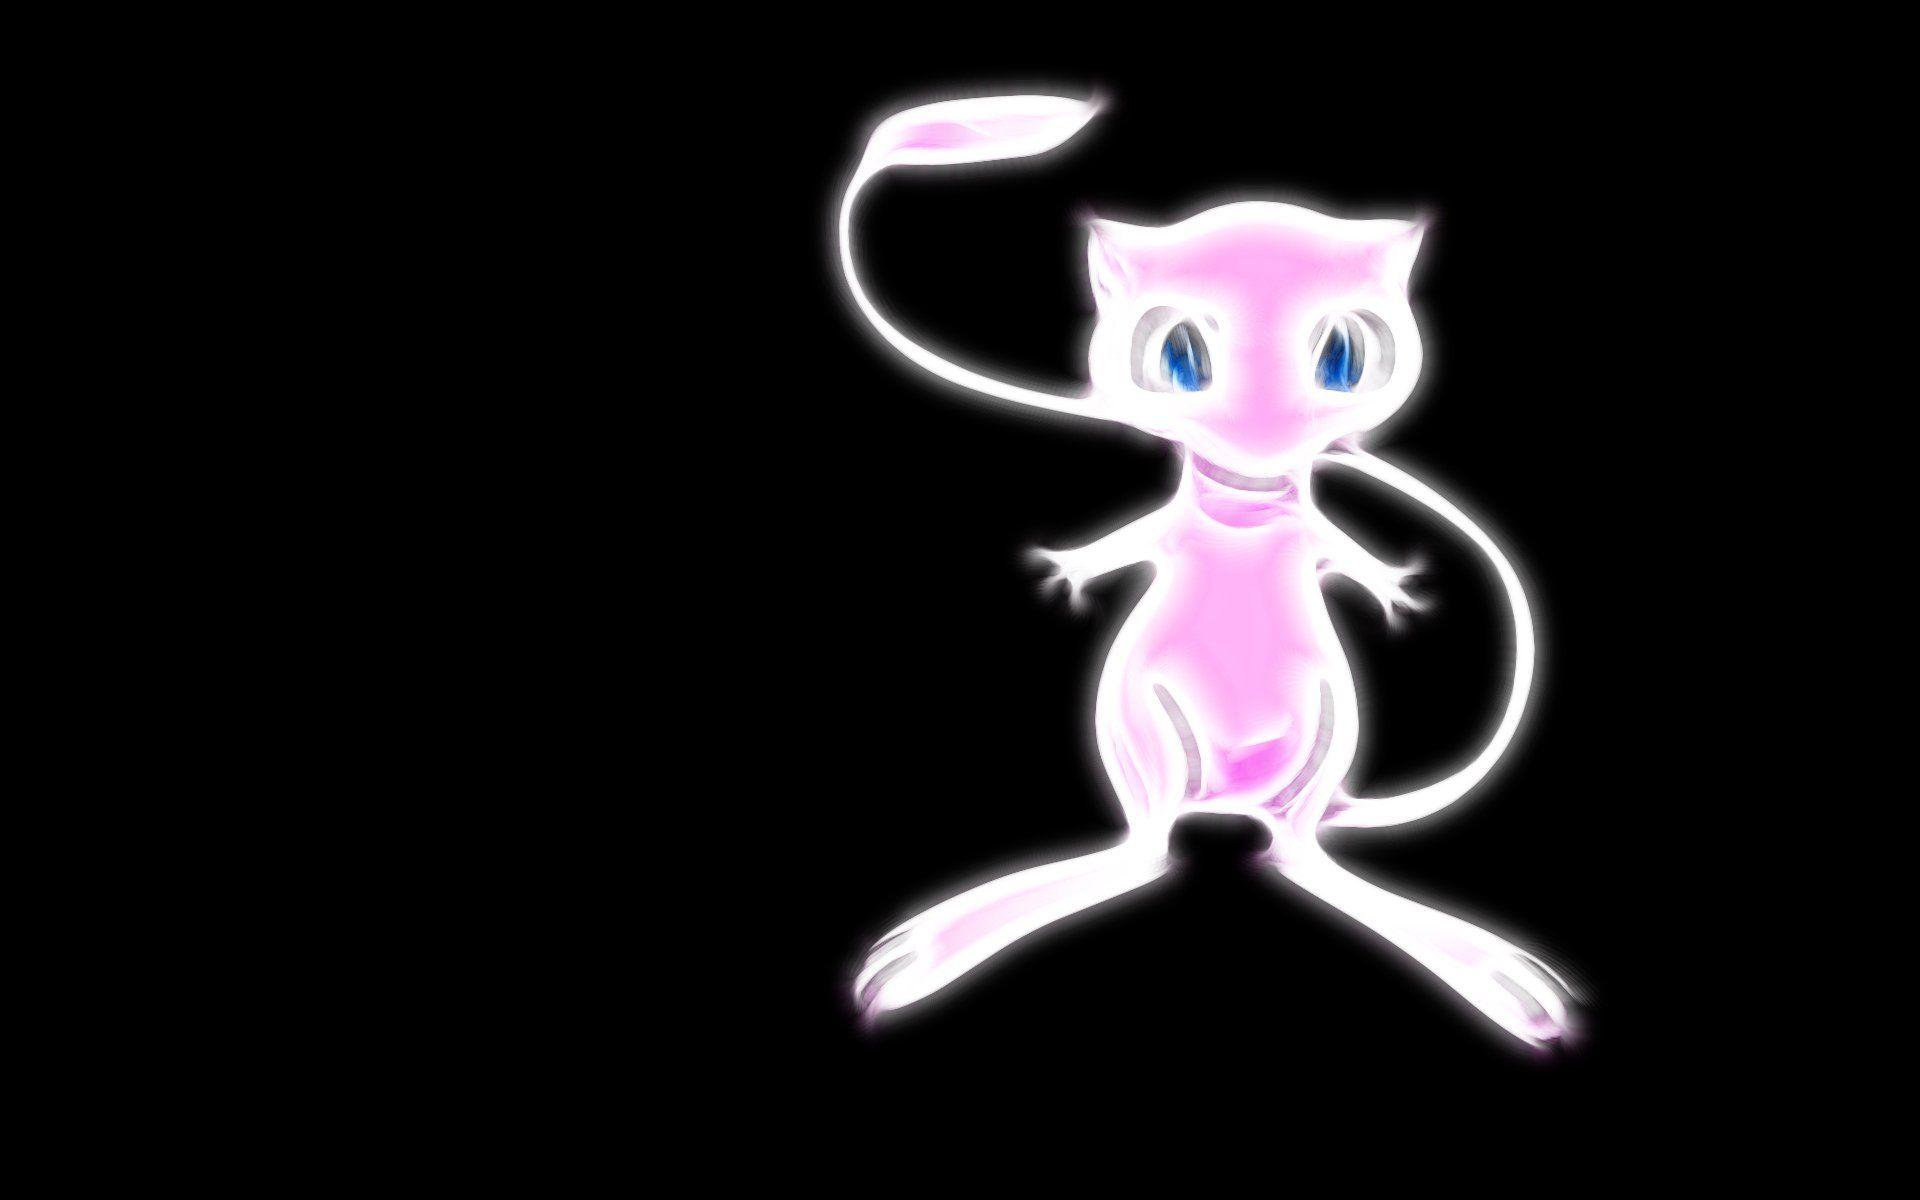 Mew (Pokémon) HD Wallpaper and Background Image